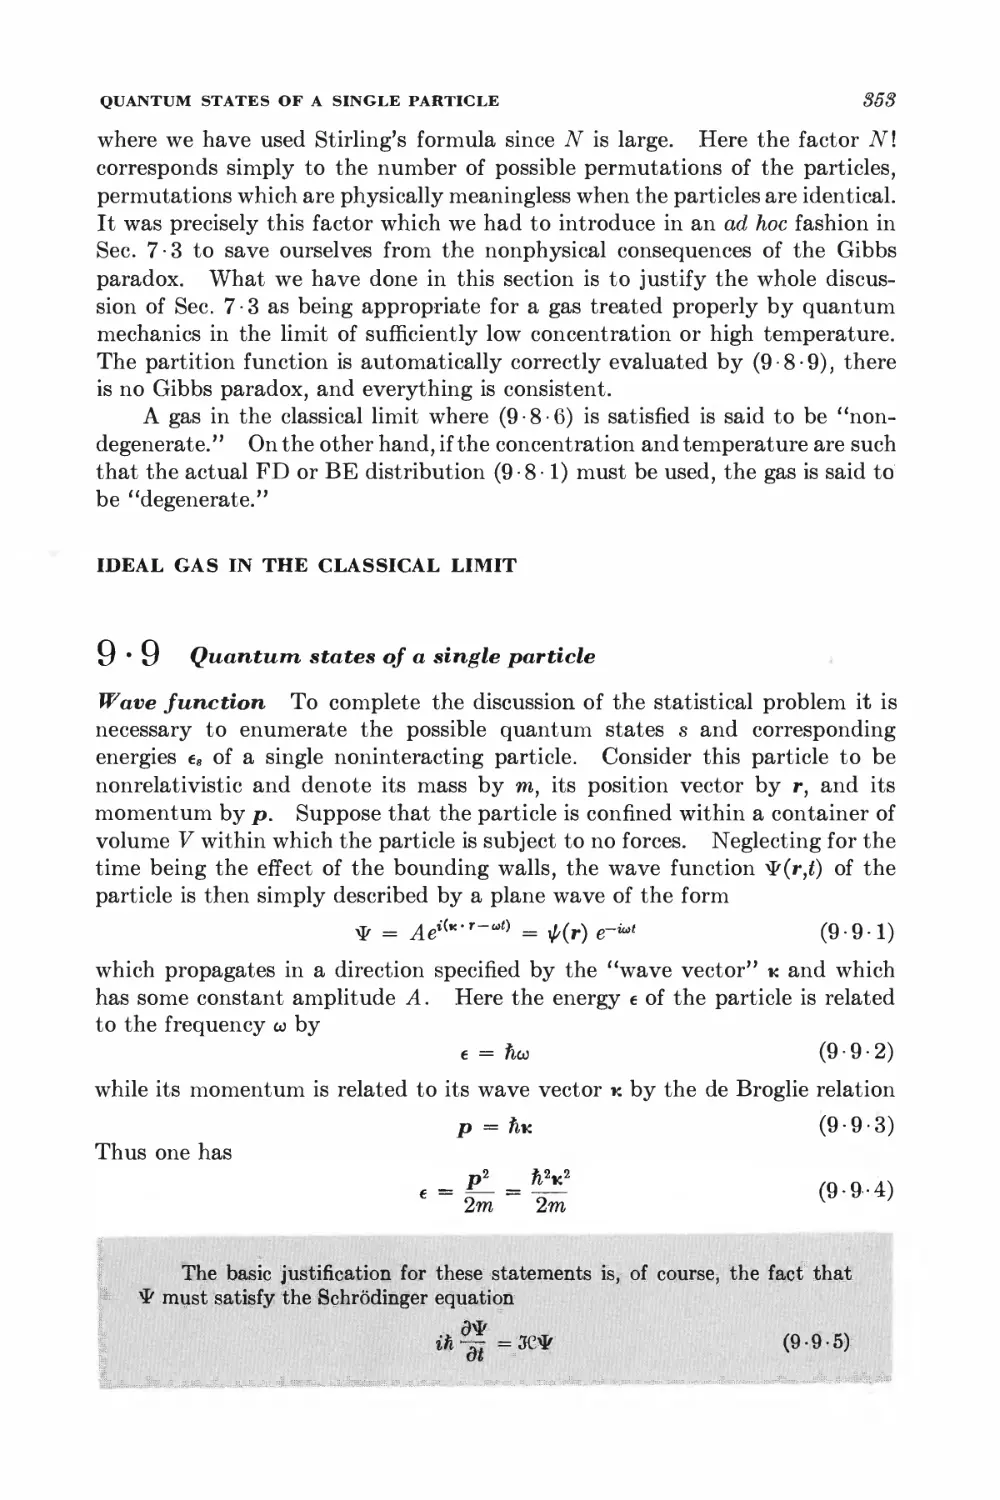 Ideal Gas in the Classical Limit